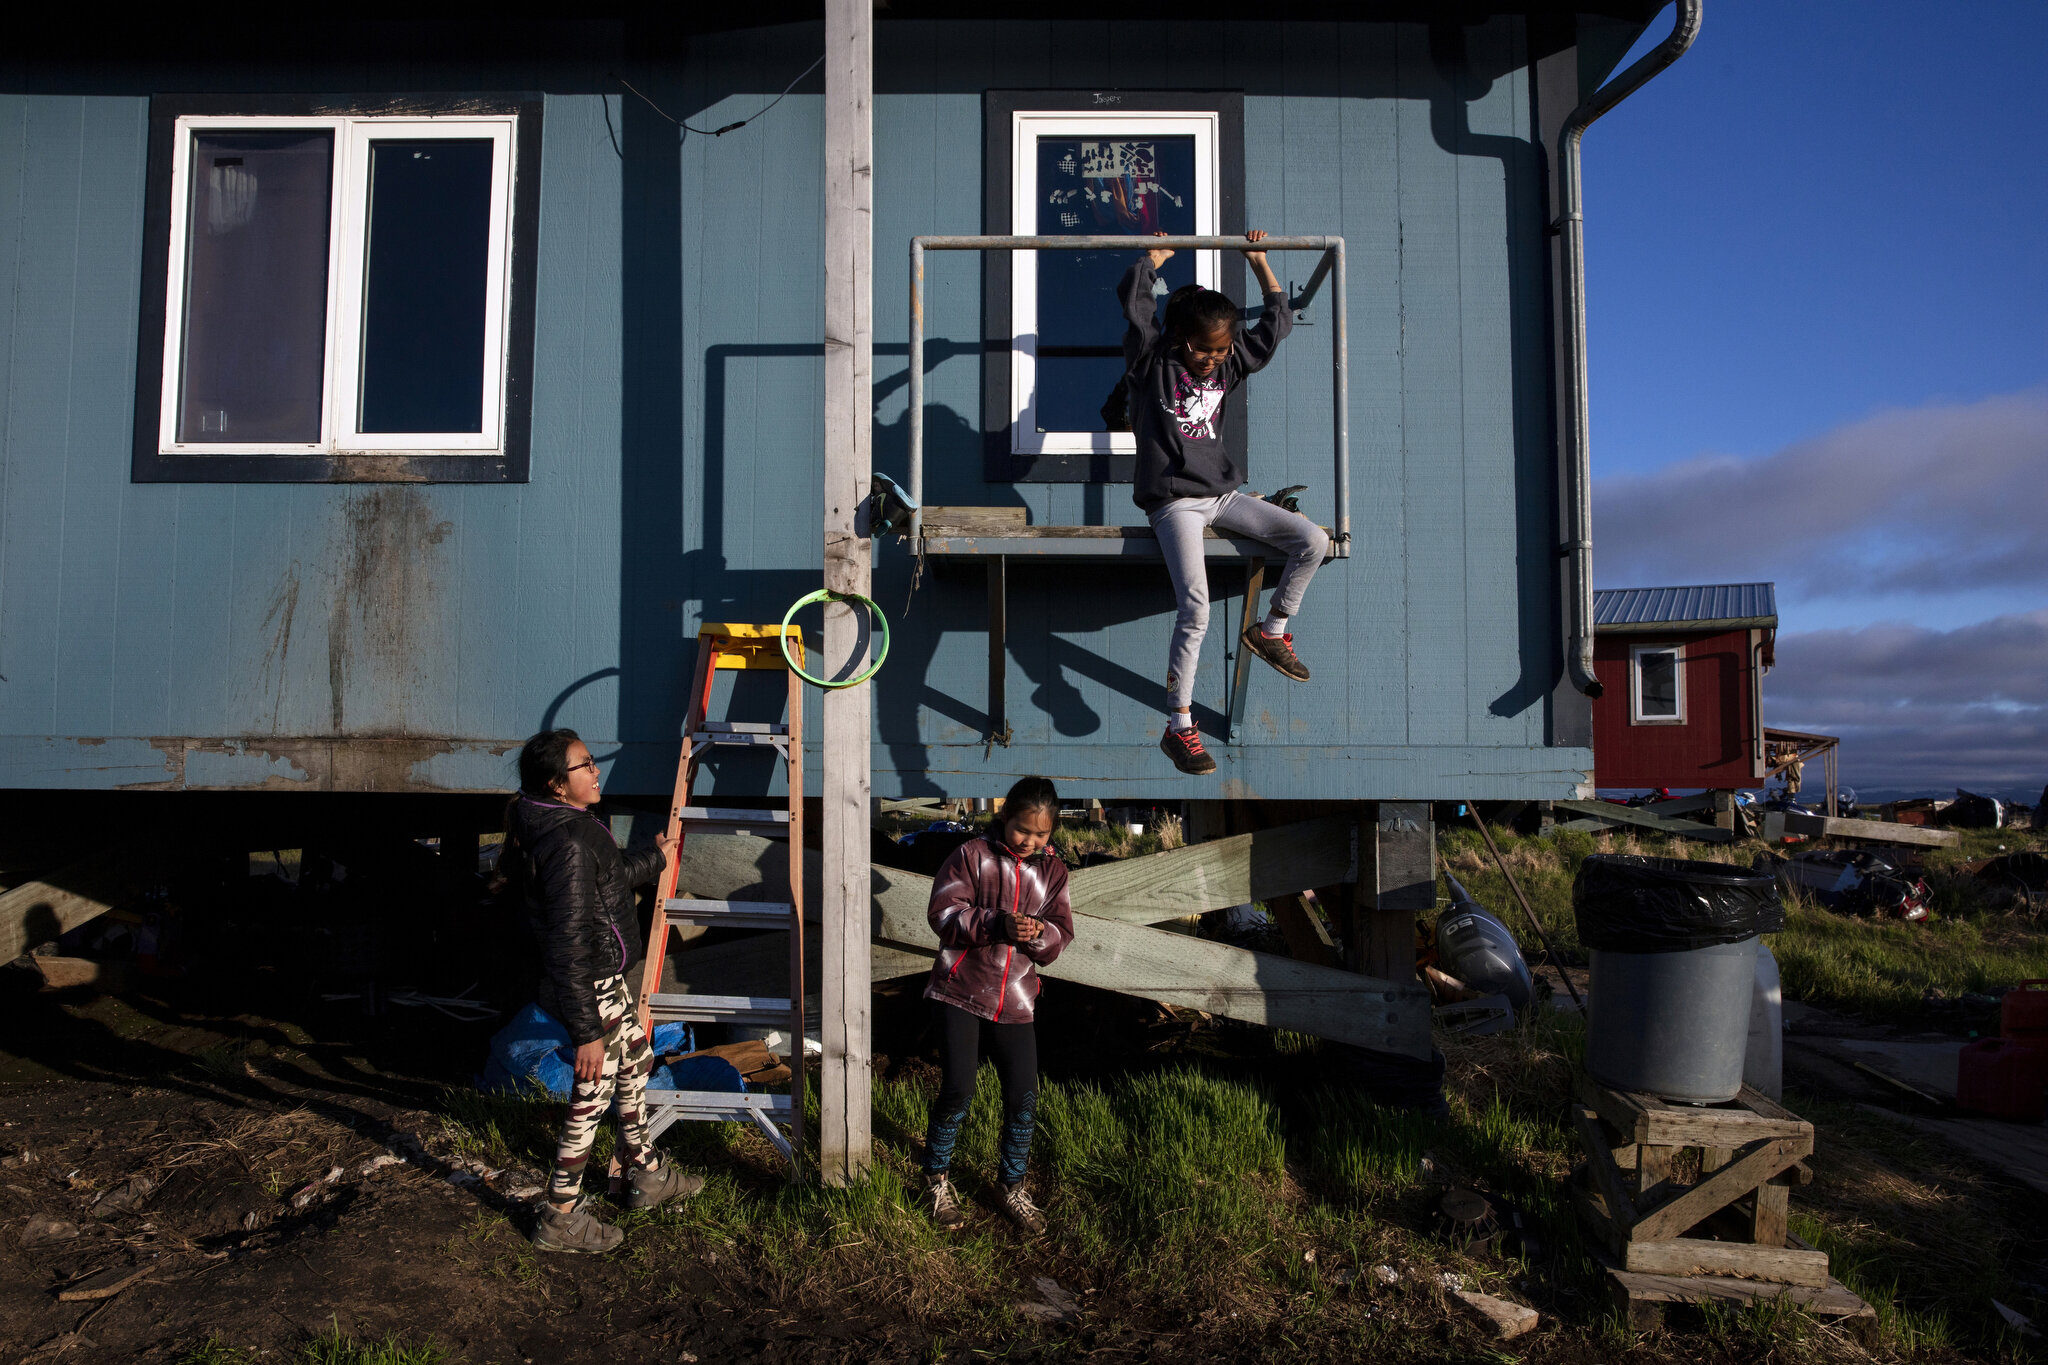  Girls play along outside one of the homes set to be demolished in Newtok, Alaska. May, 2019. Homes rest on pilings in the village of Newtok in western Alaska. This Yupik village (population 380), located along the Ninglik River in the lower Kuskokwi